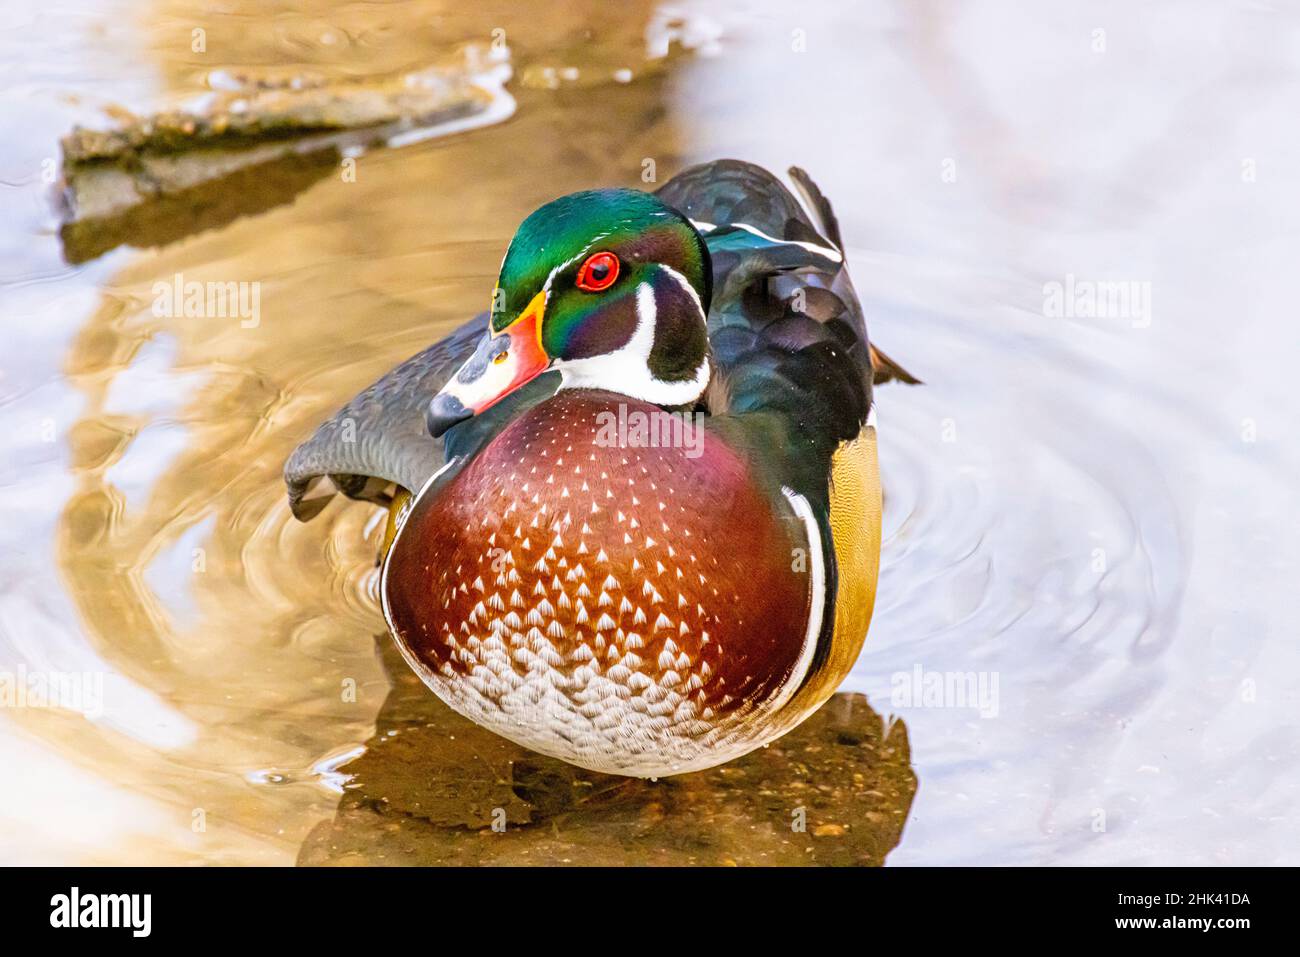 USA, Colorado, Fort Collins. Male American wood duck in water. Stock Photo